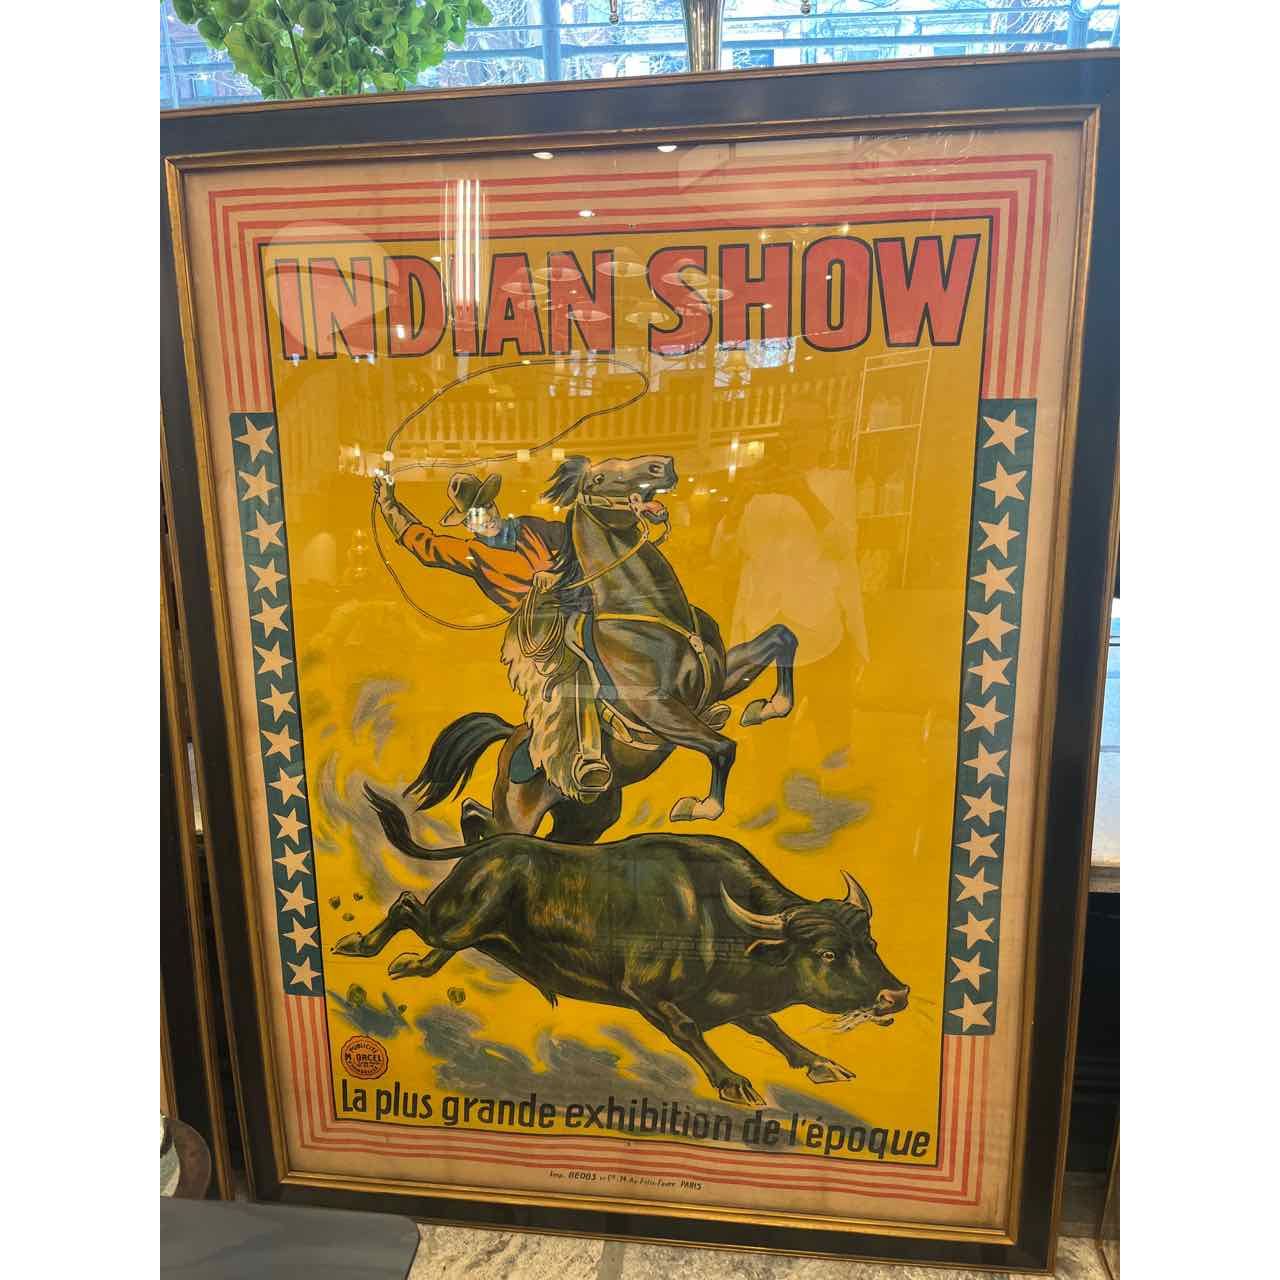 Rare, matched pair of framed French "wild west show" advertising posters